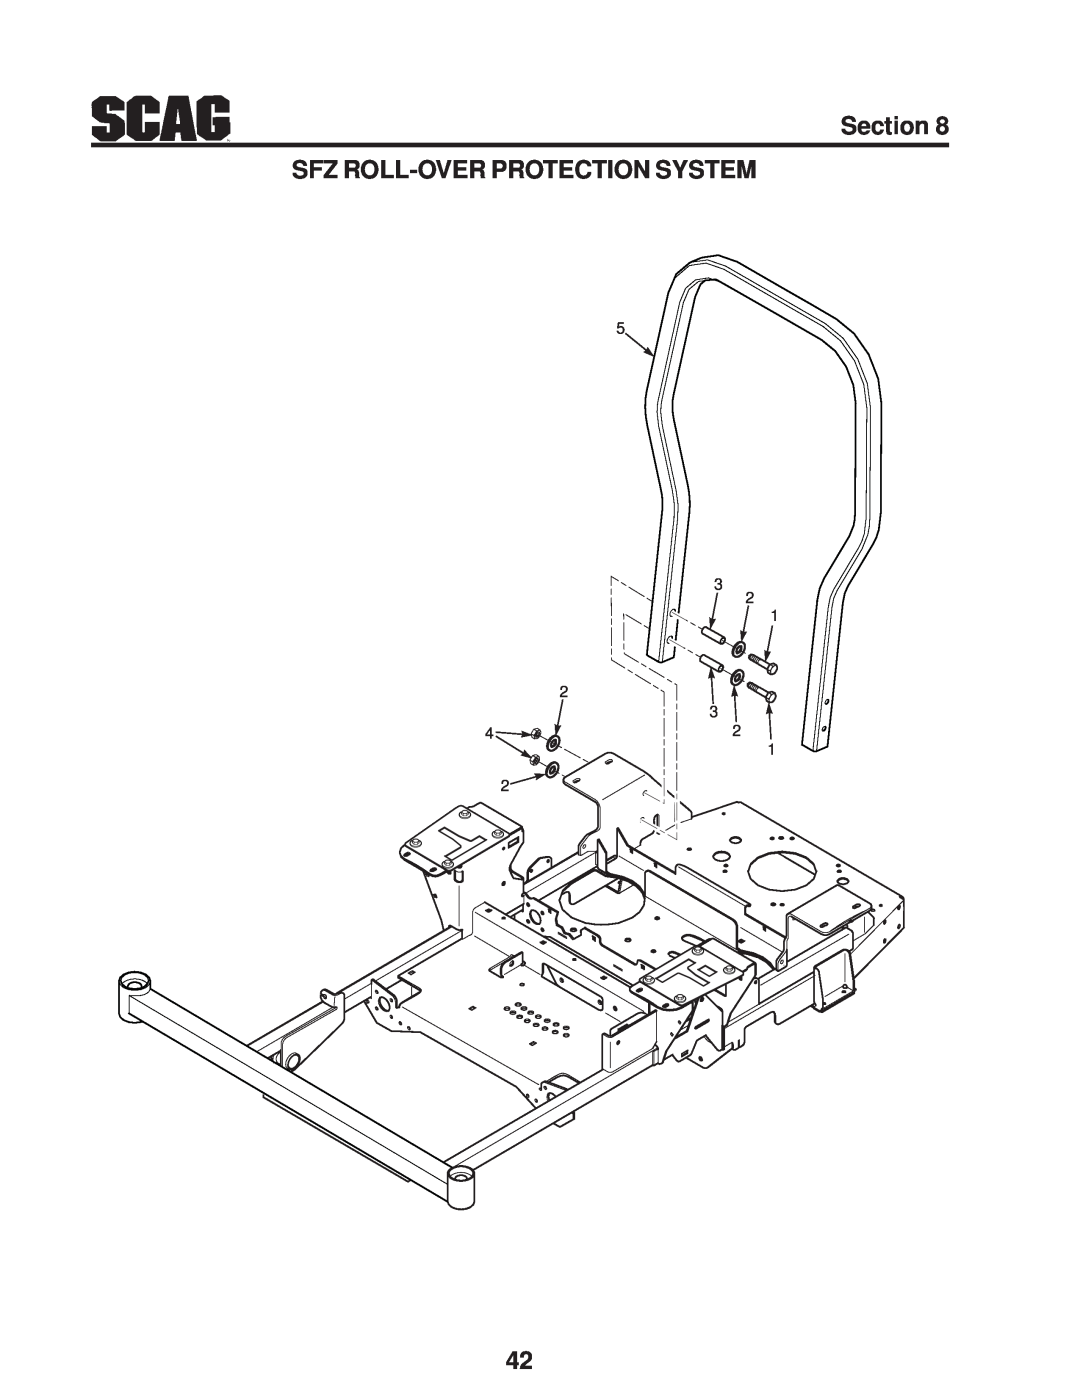 Scag Power Equipment manual Section SFZ ROLL-OVER PROTECTION SYSTEM 